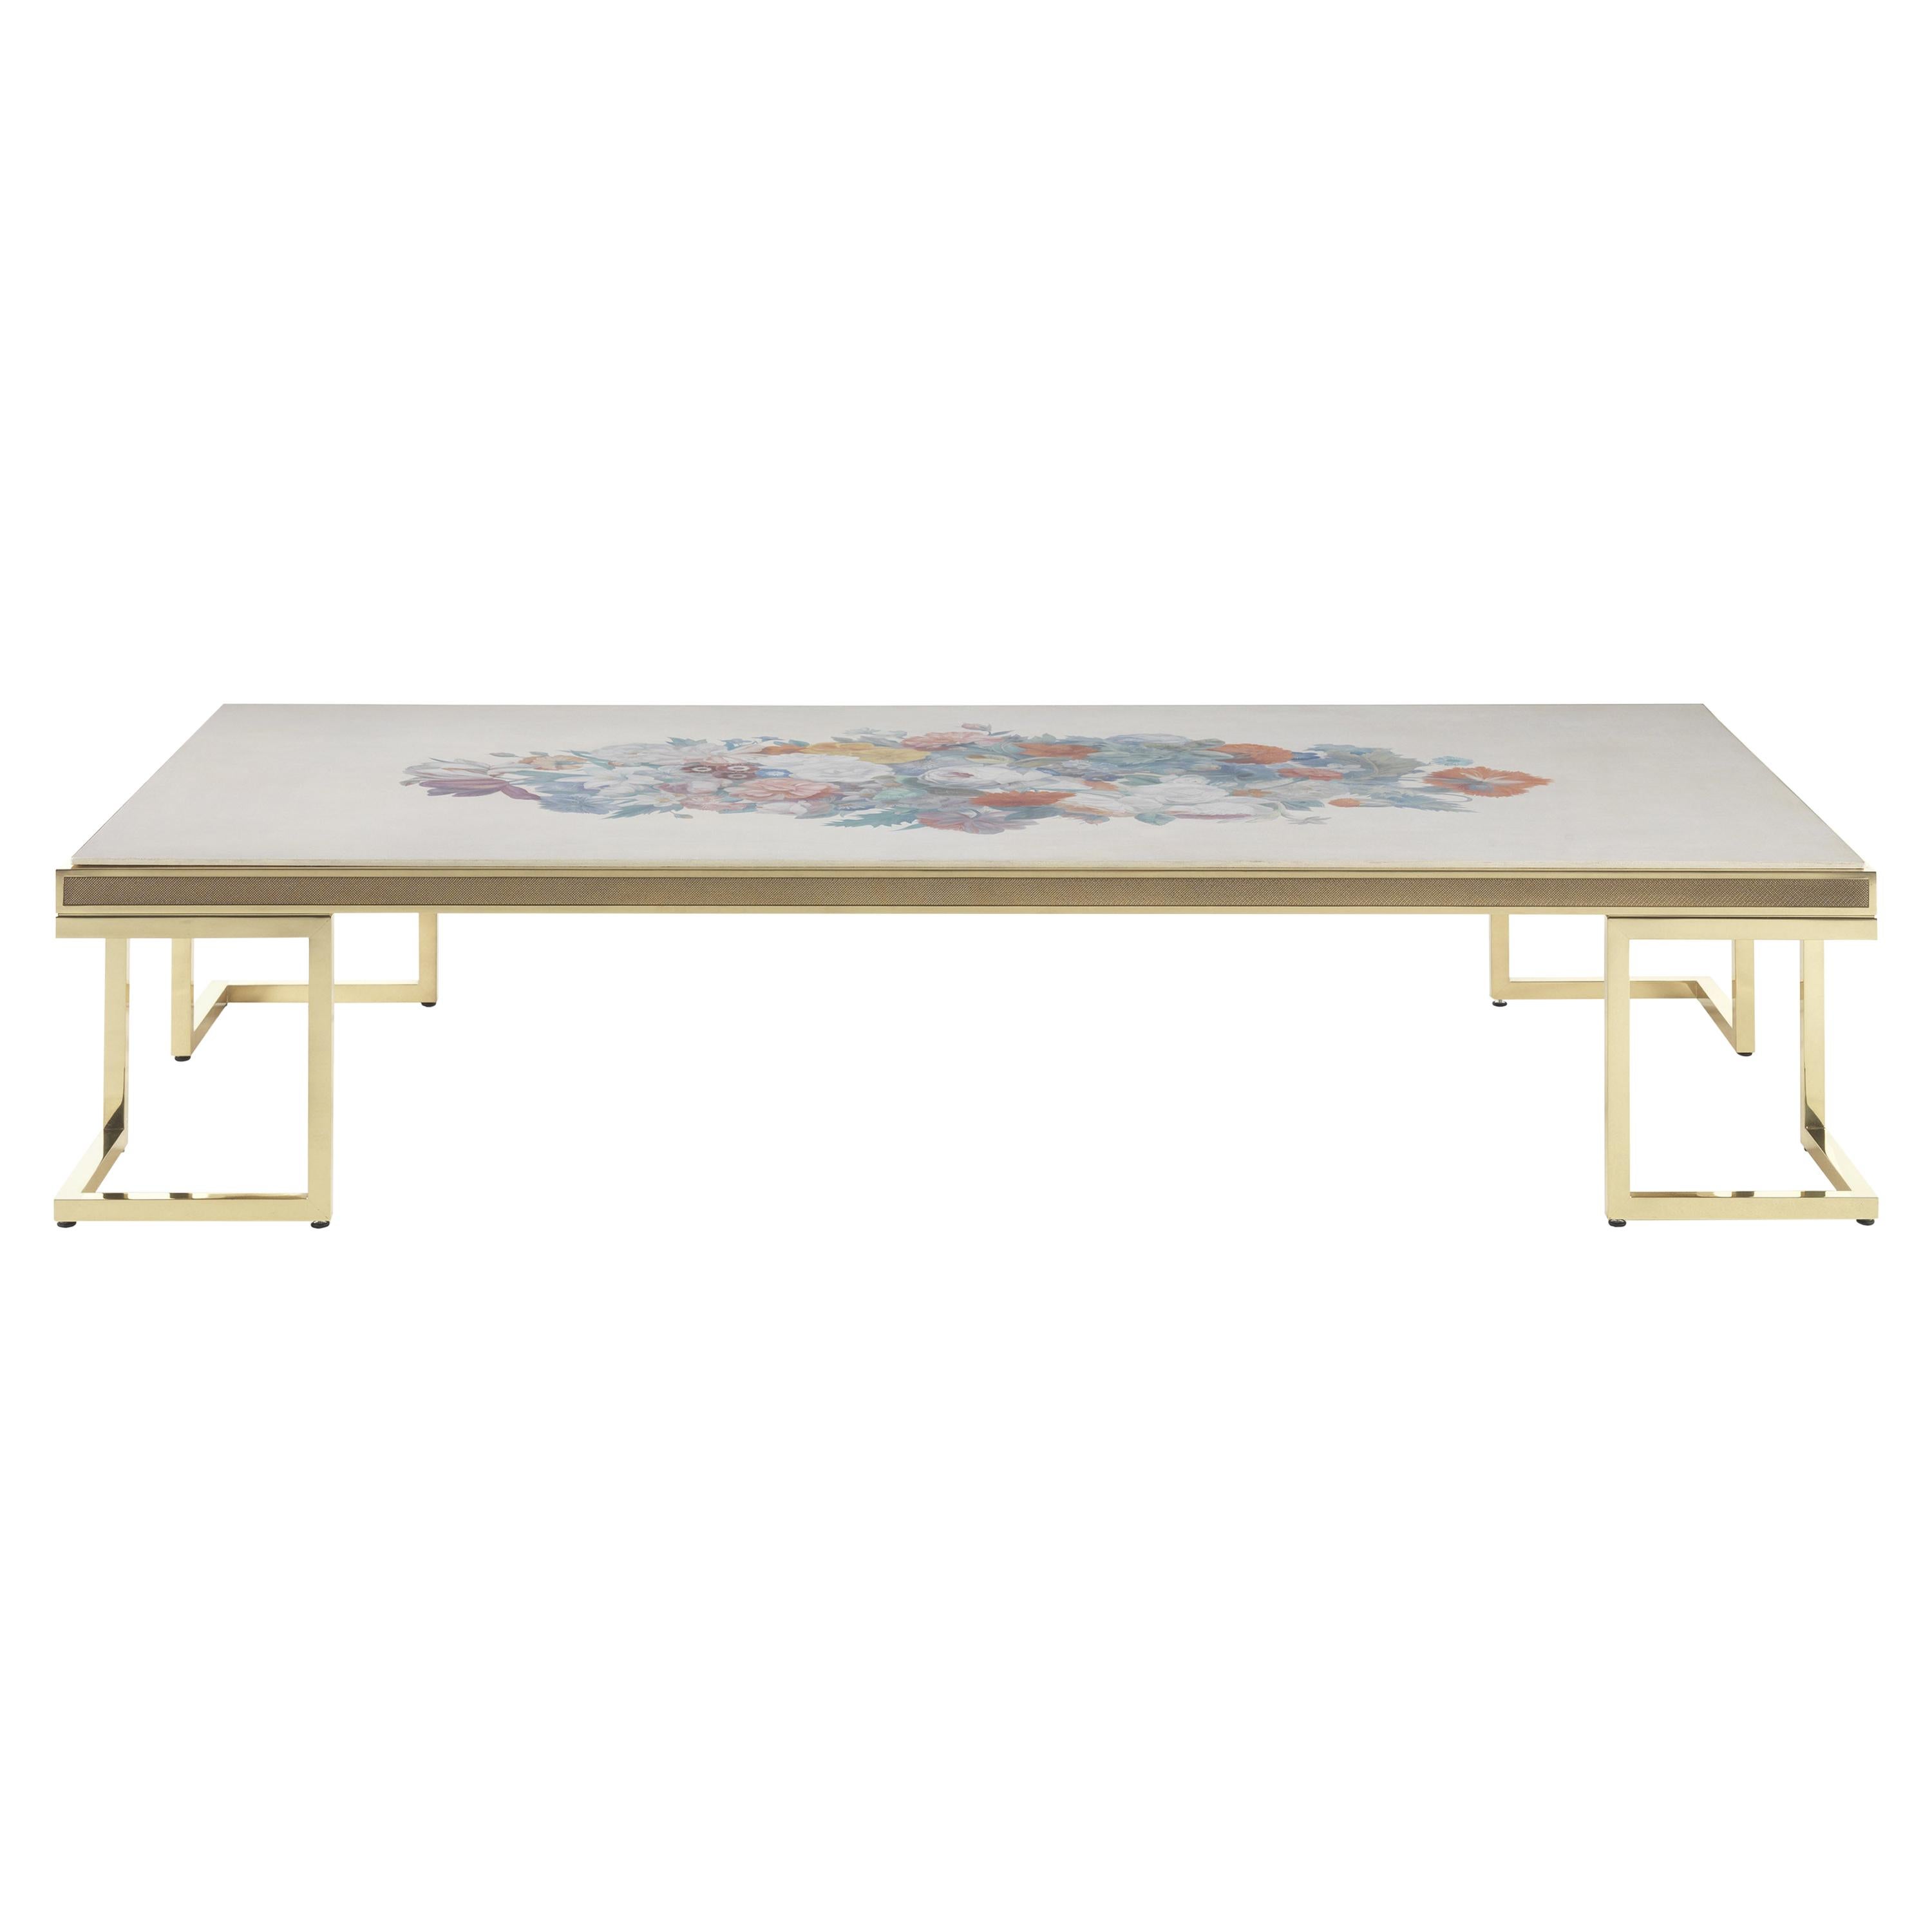 21st Century Folies Central Table in Brass and Top with Hand-made decorations